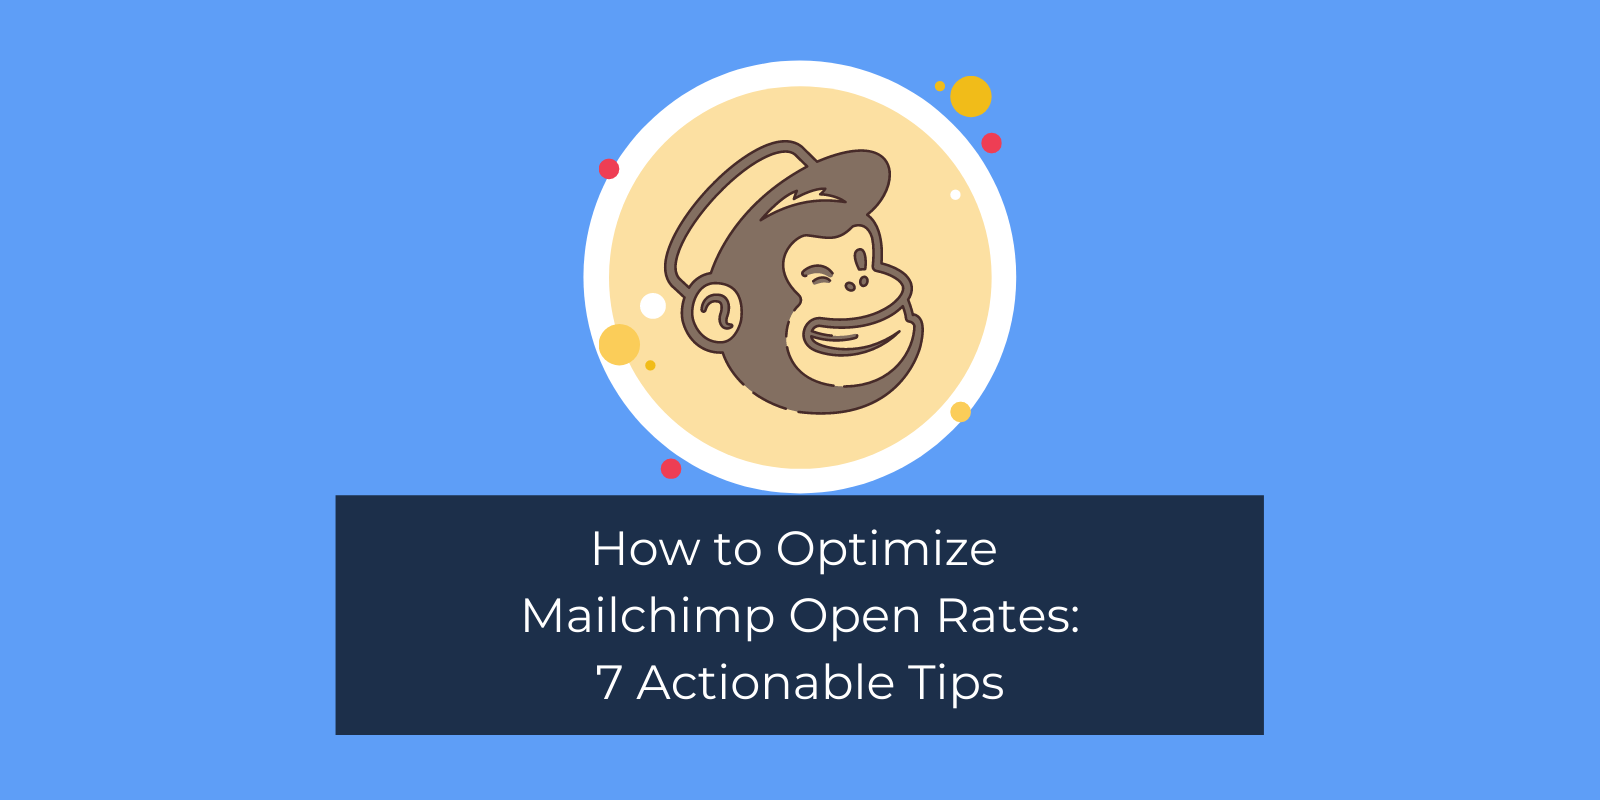 How to Optimize Mailchimp Open Rates: 7 Actionable Tips